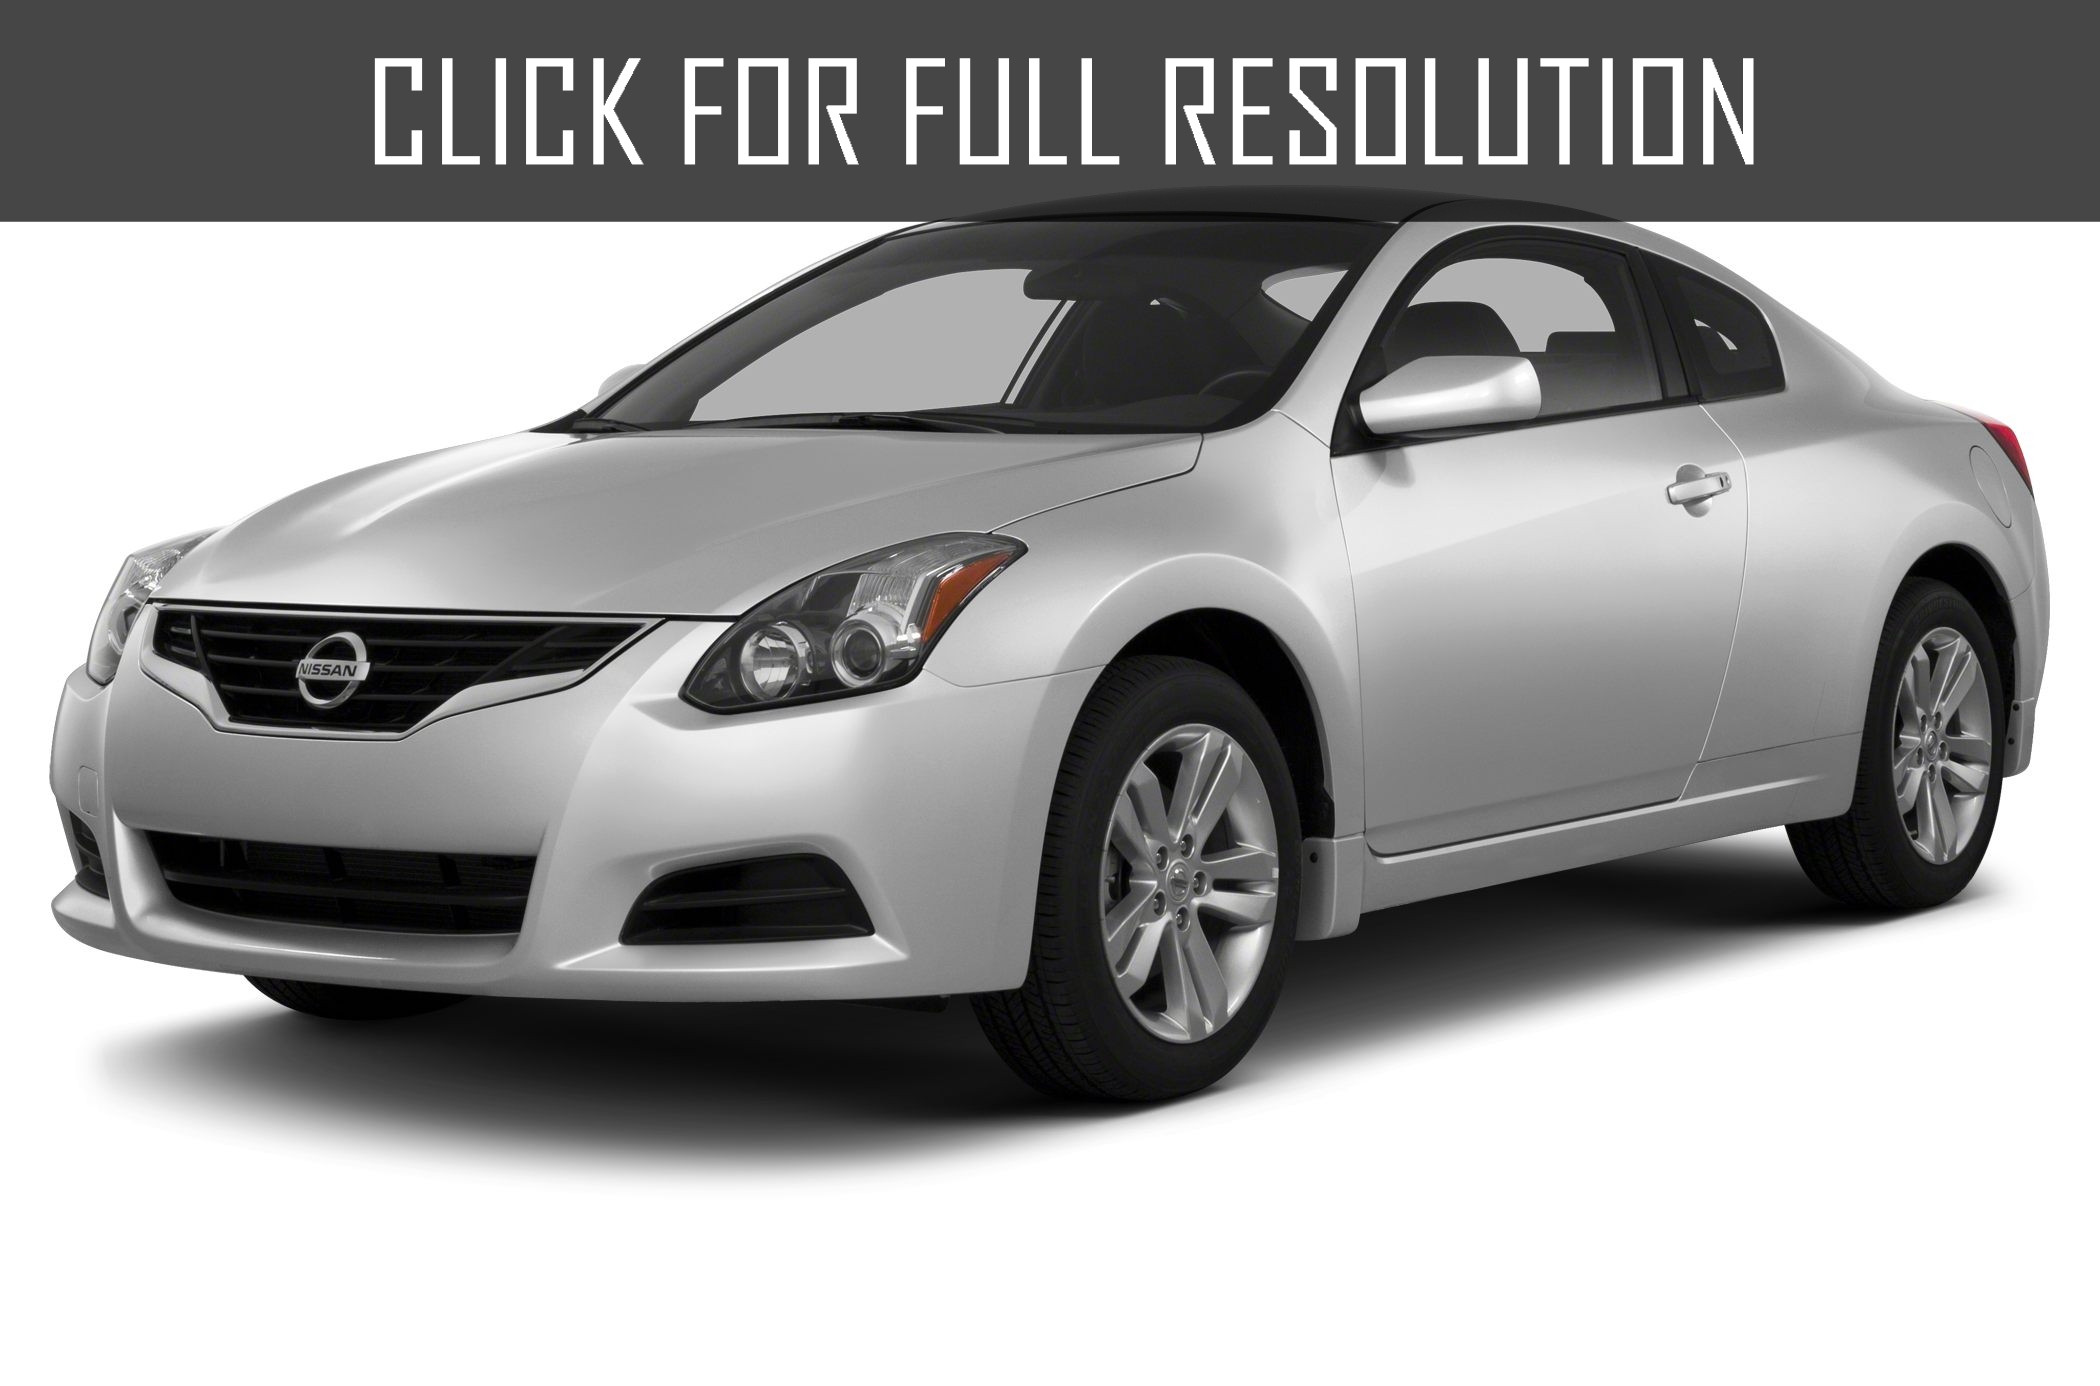 Nissan Altima Coupe 2013